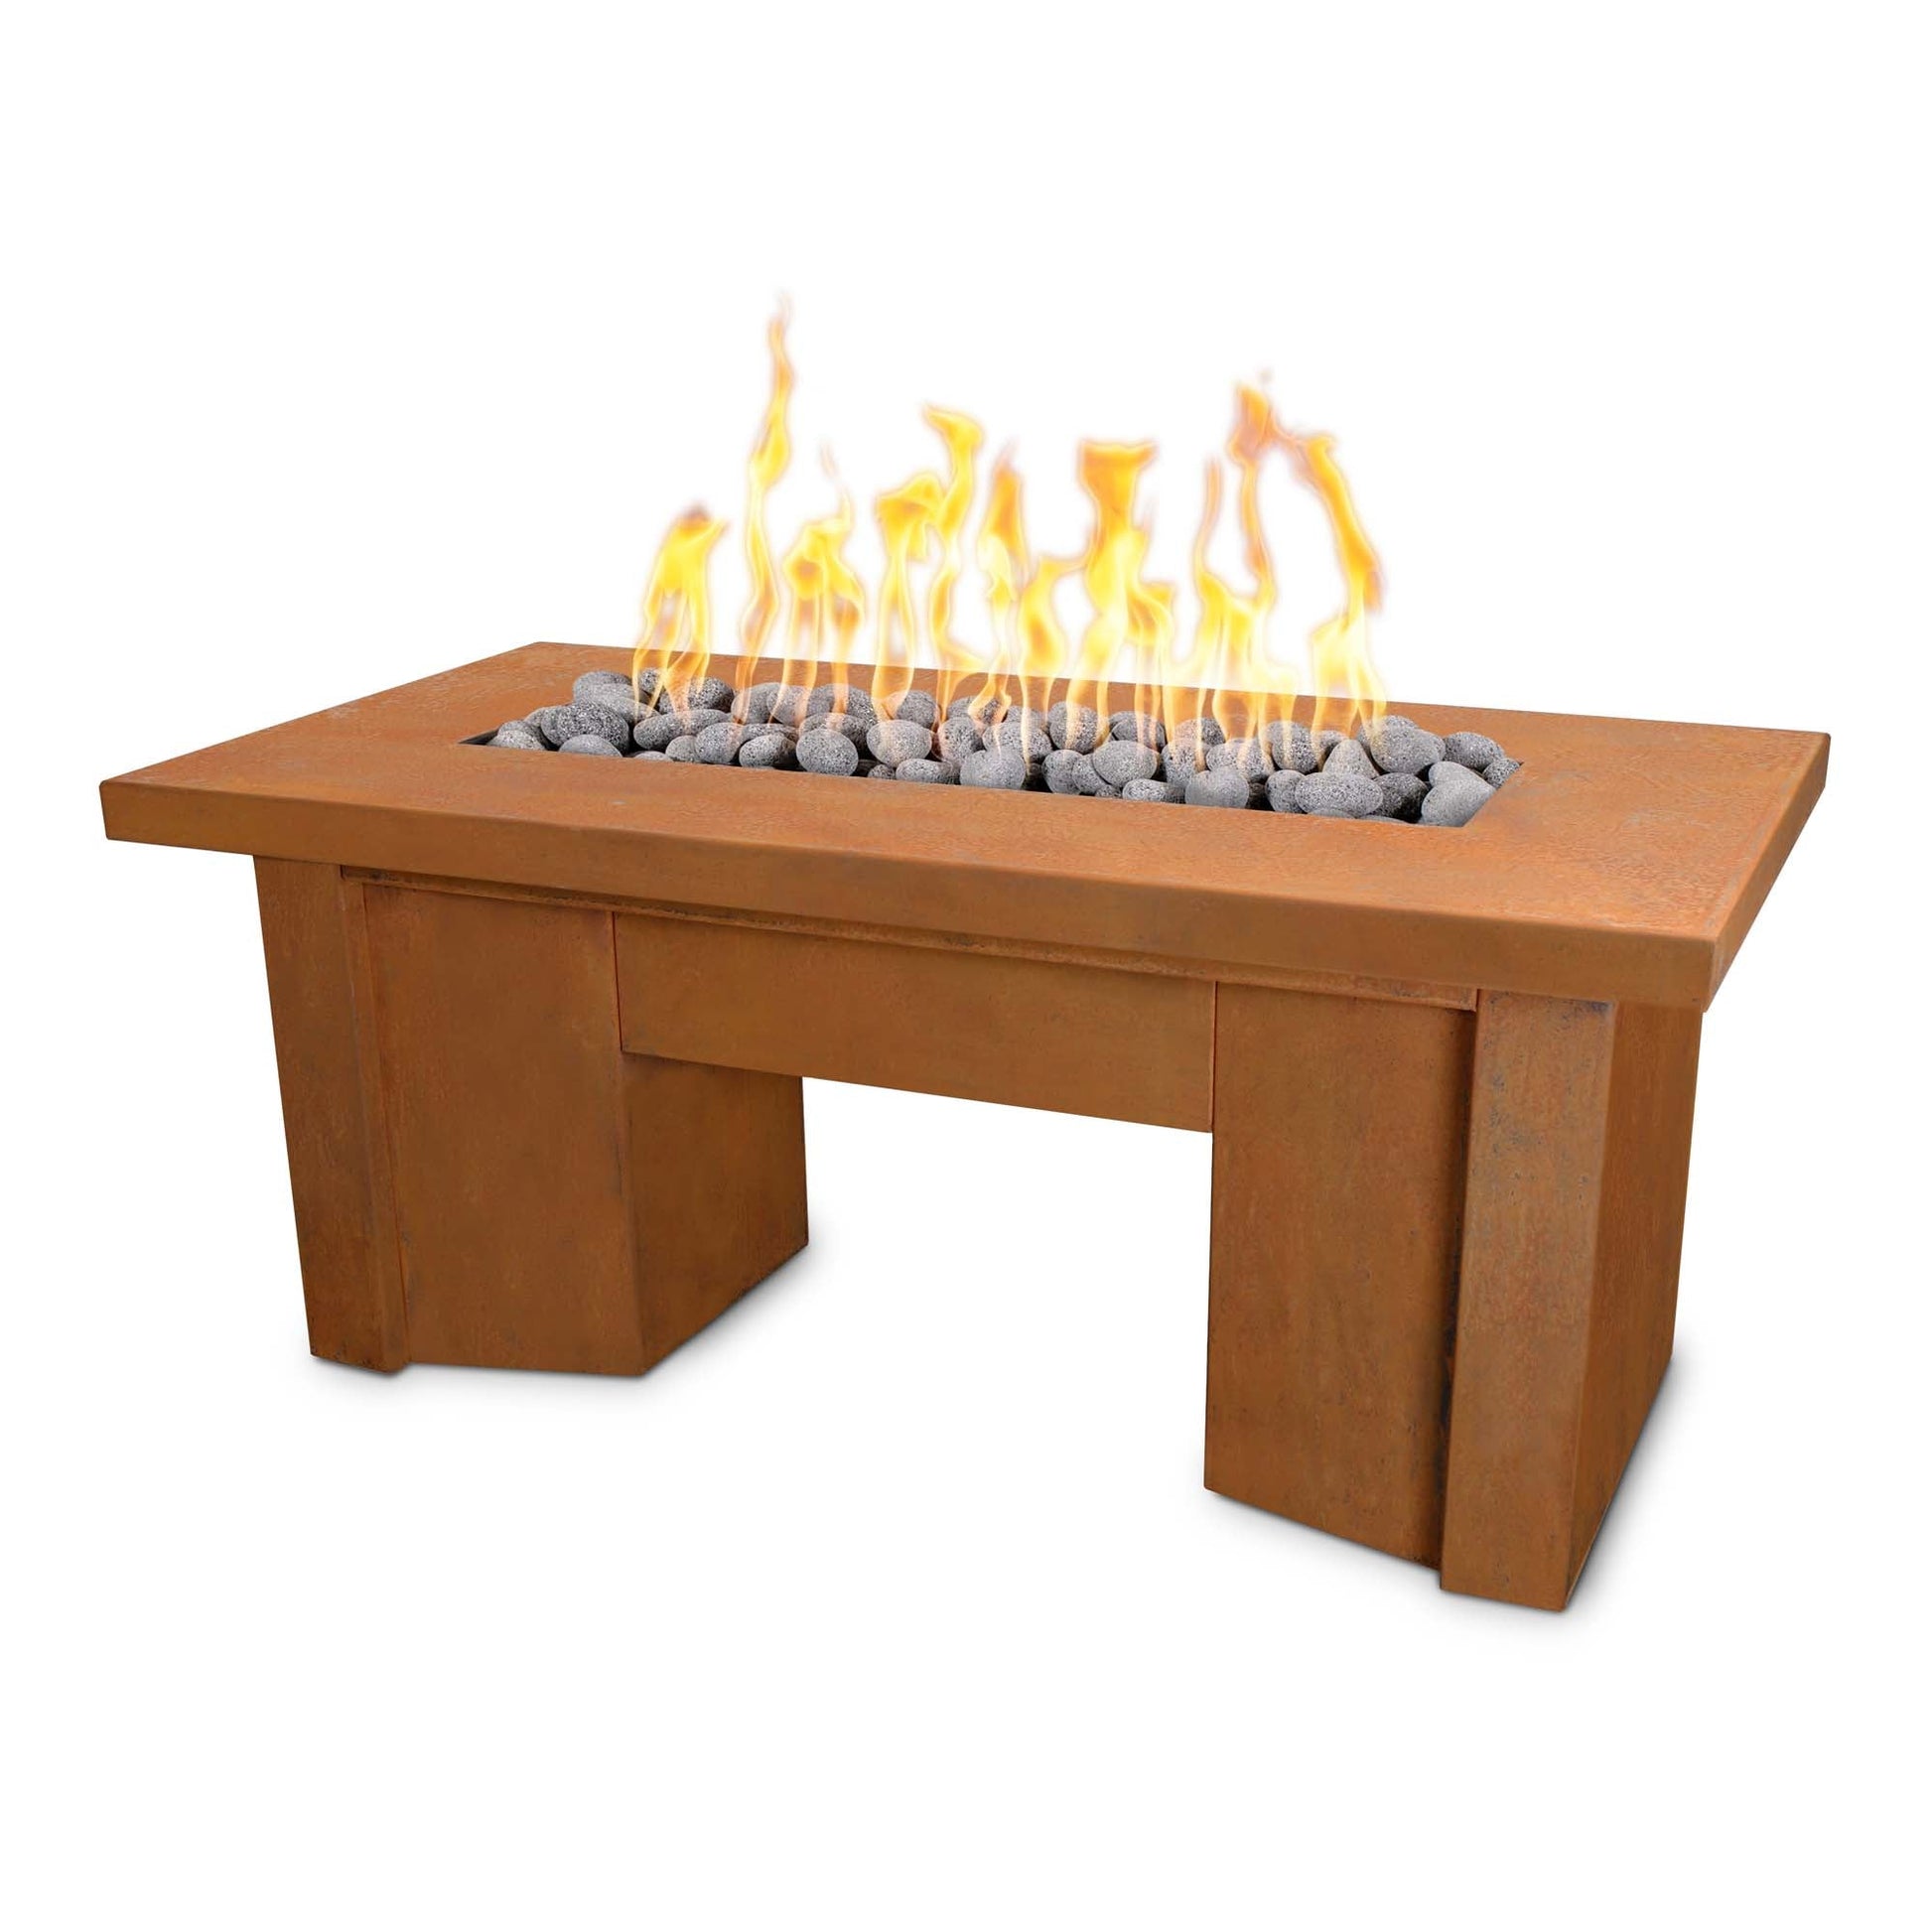 The Outdoor Plus Rectangular Alameda 48" Corten Steel Natural Gas Fire Pit with Flame Sense with Spark Ignition